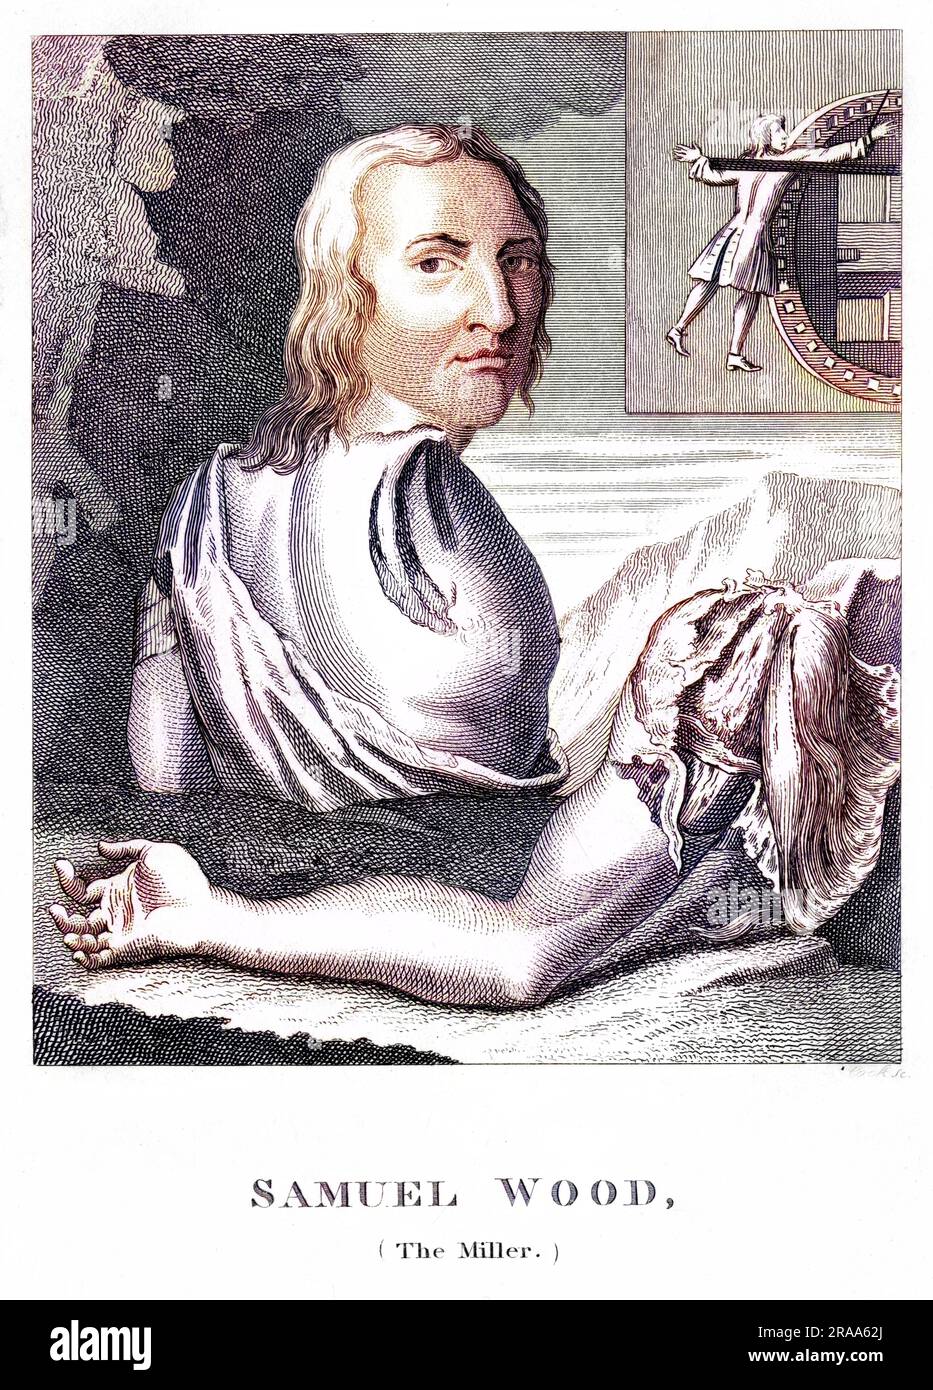 SAMUEL WOOD - miller who had to operate his mill single- handed on account of how he lost the other one in an unfortunate accident, as depicted.     Date: circa 1737 Stock Photo